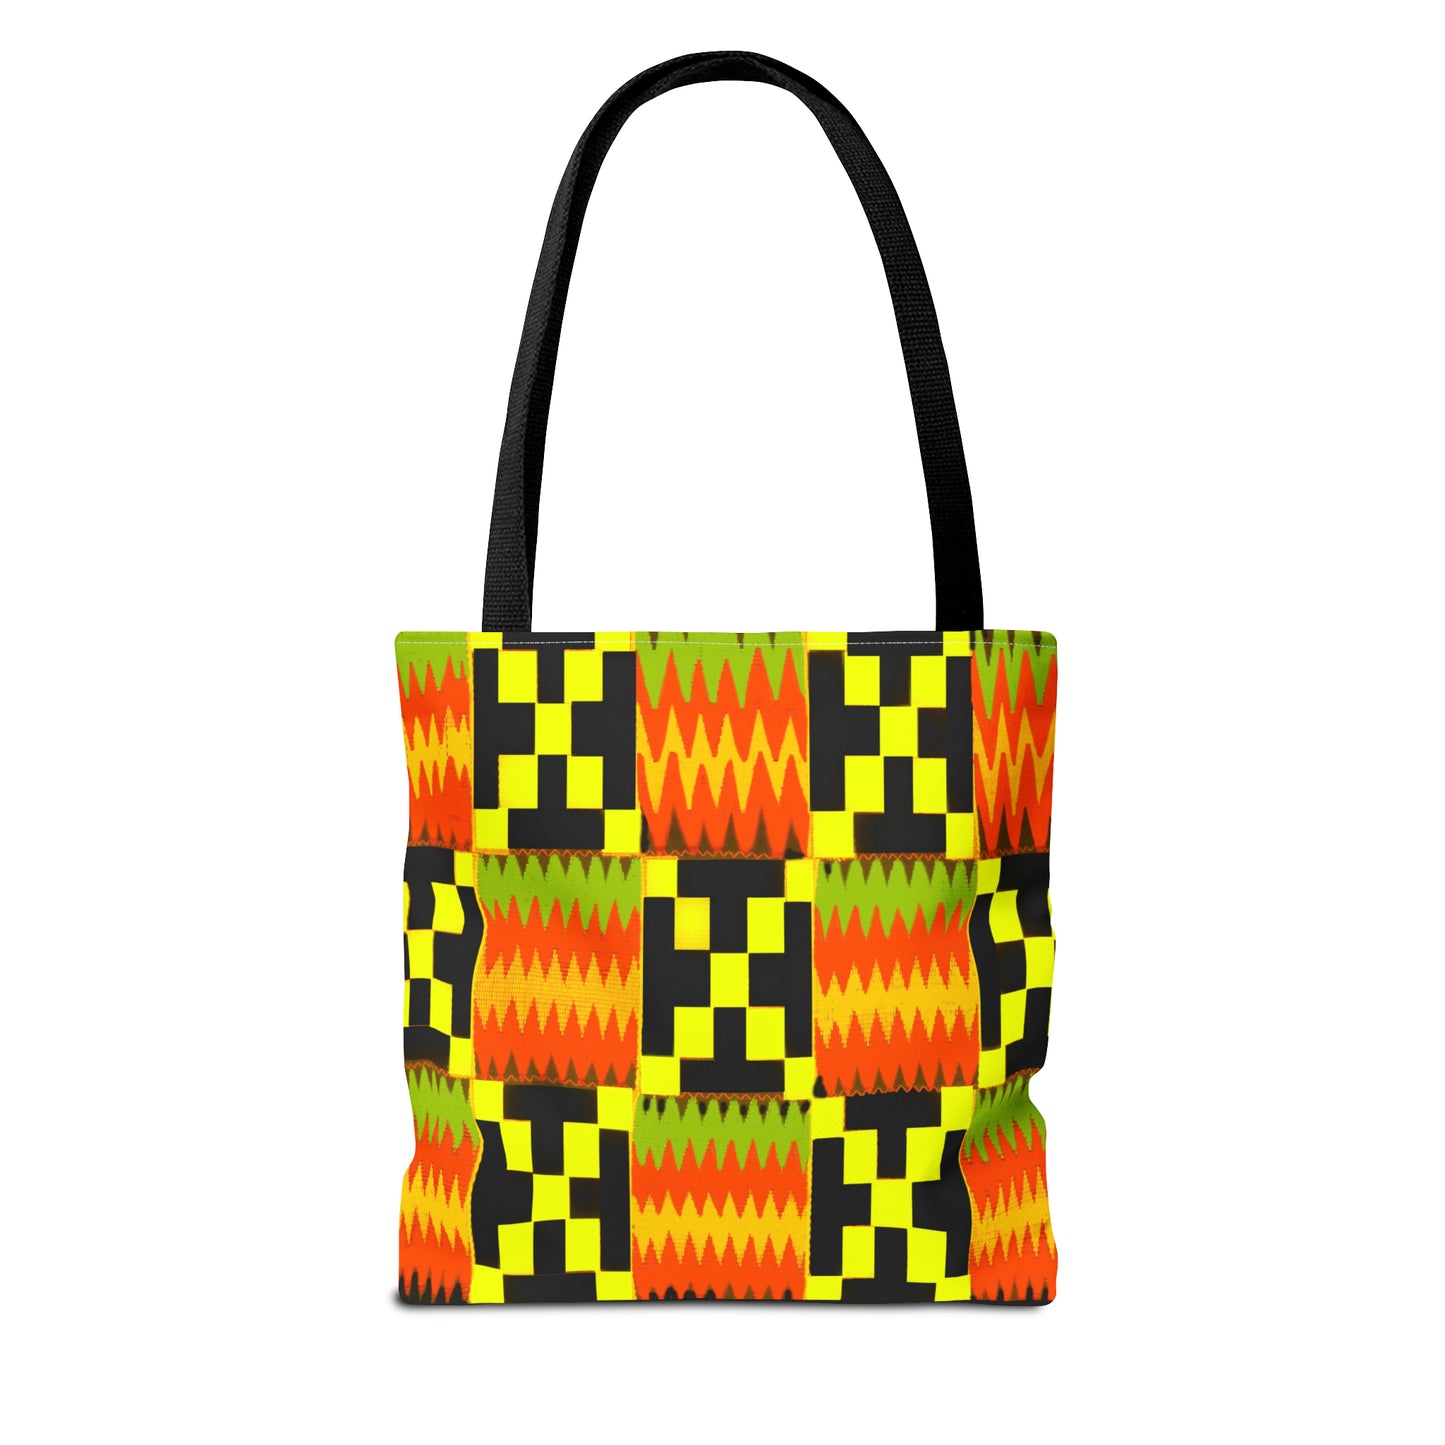 Kente Design Tote: Vibrant, Durable, & Available in 3 Sizes